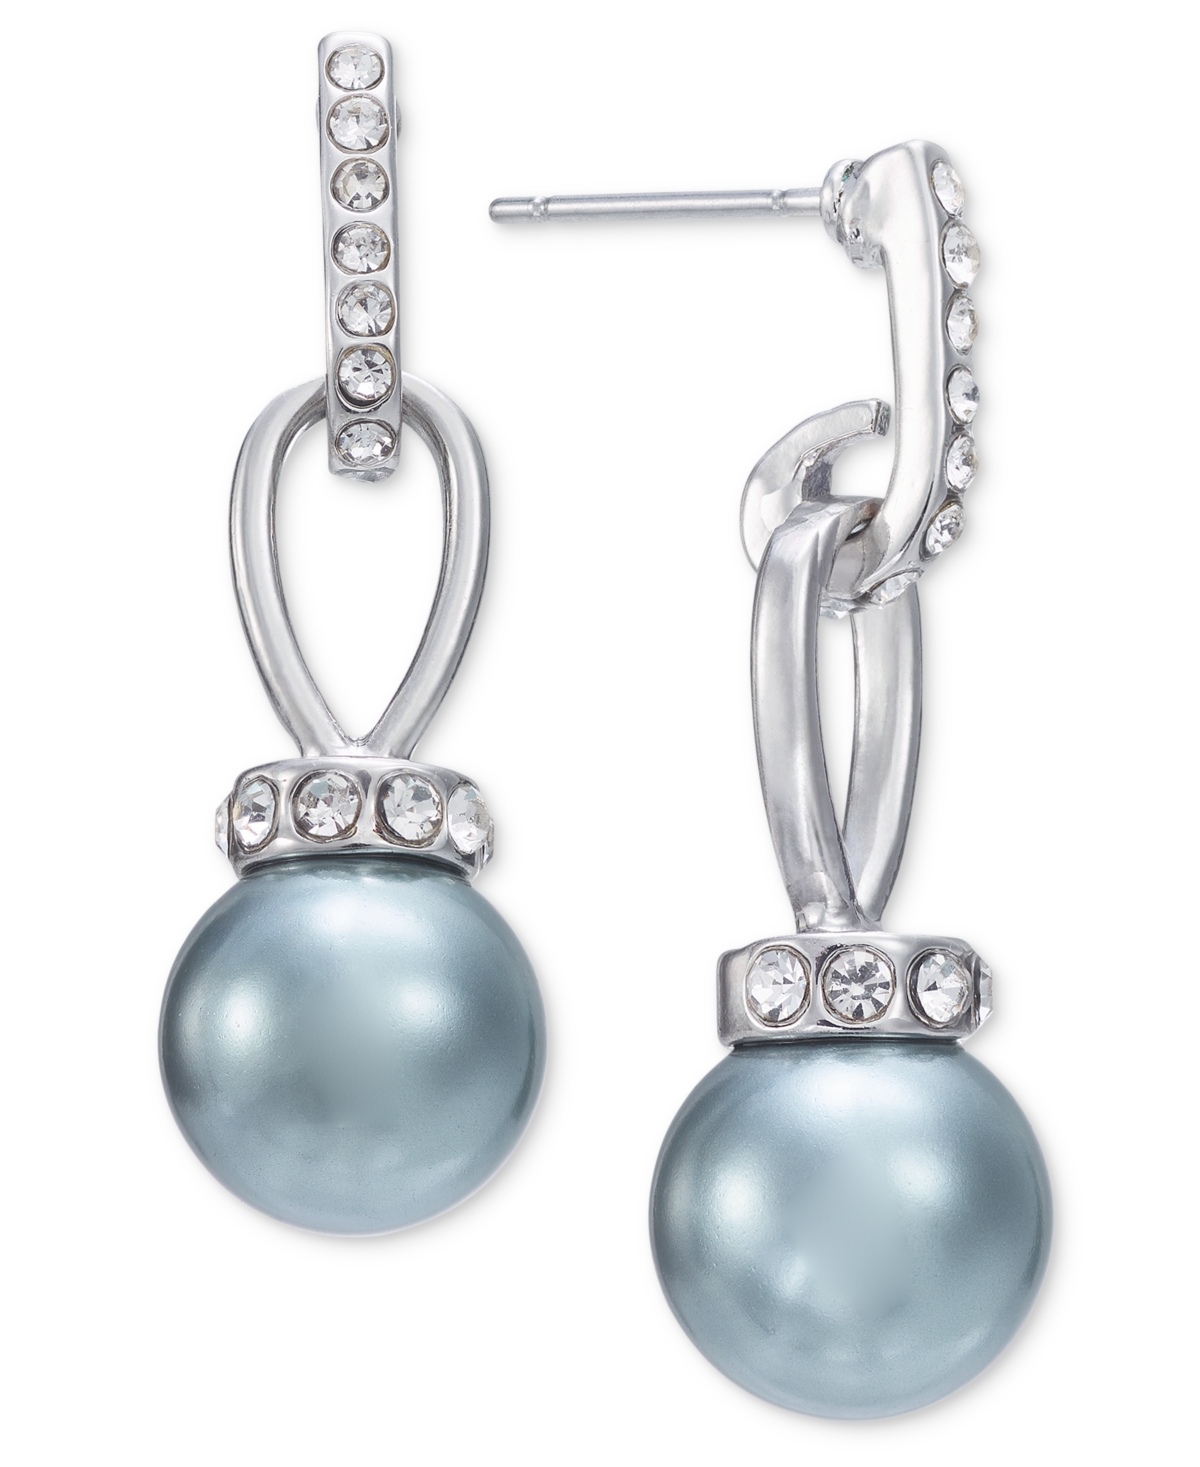 Silver-Tone Pave & Color Imitation Pearl Drop Earrings, Created for Macy's - Multi